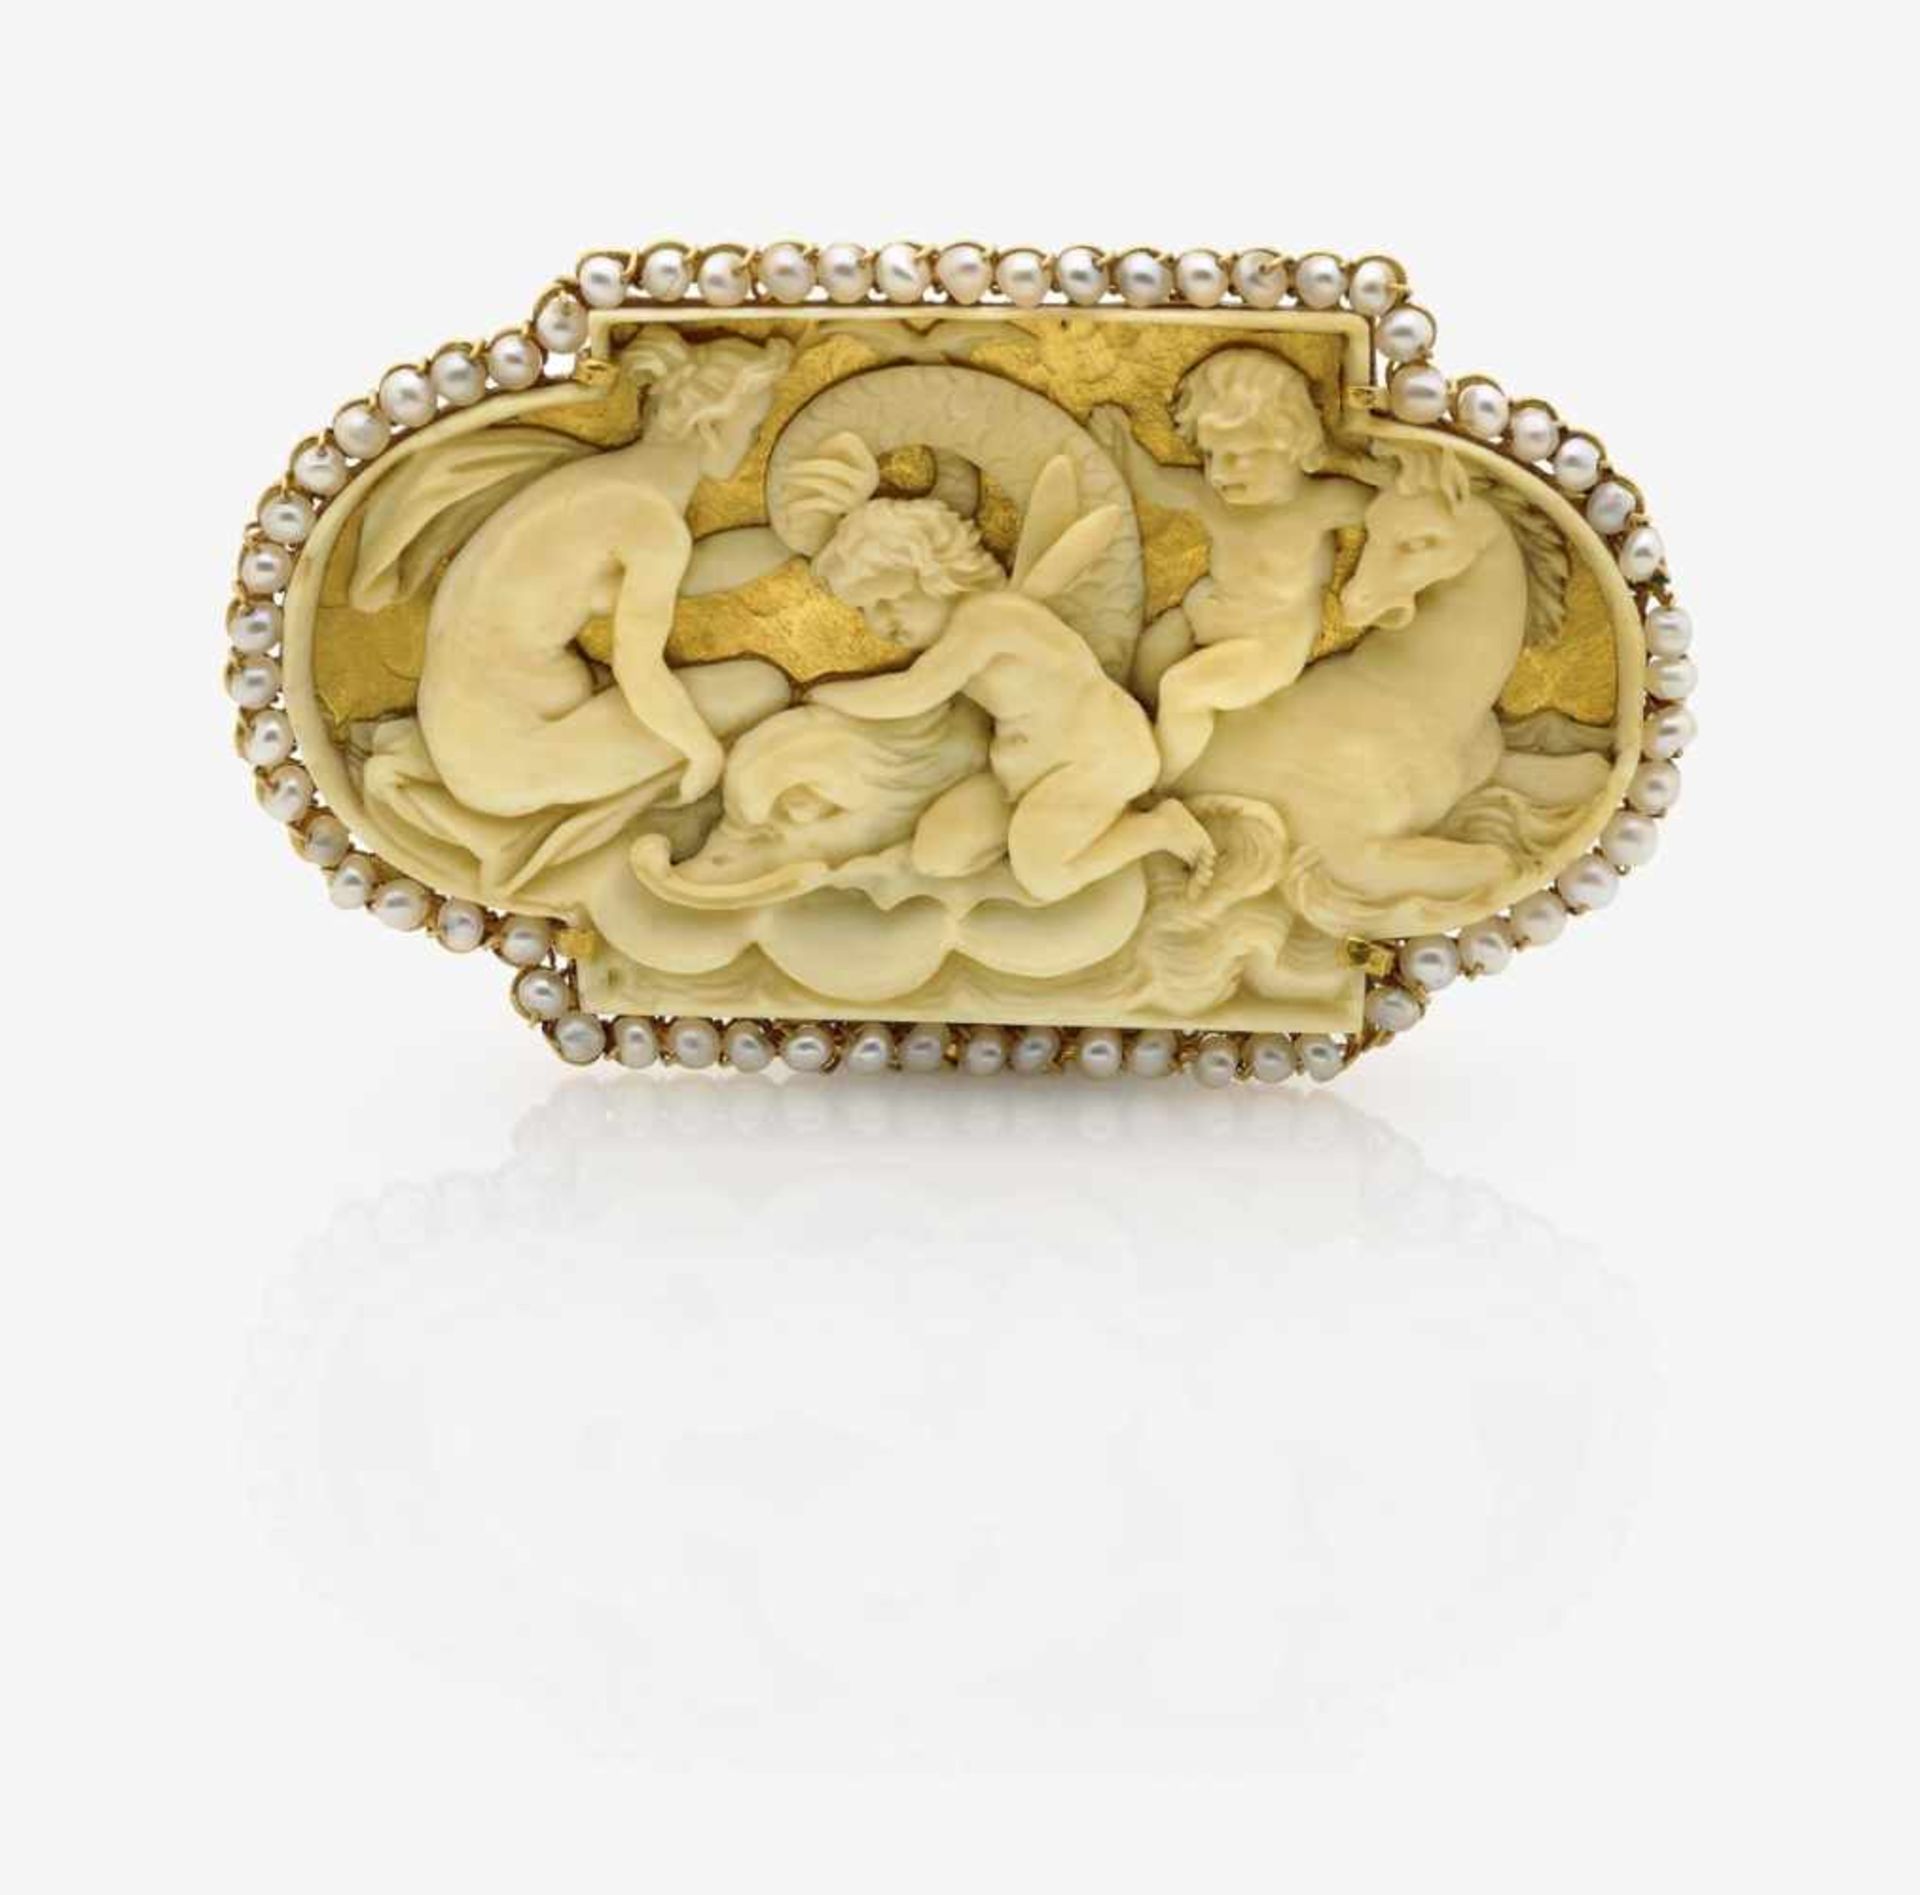 A Carved Ivory Brooch surrounded by PearlsFlanders, 17th Century, setting later 18K yellow gold (